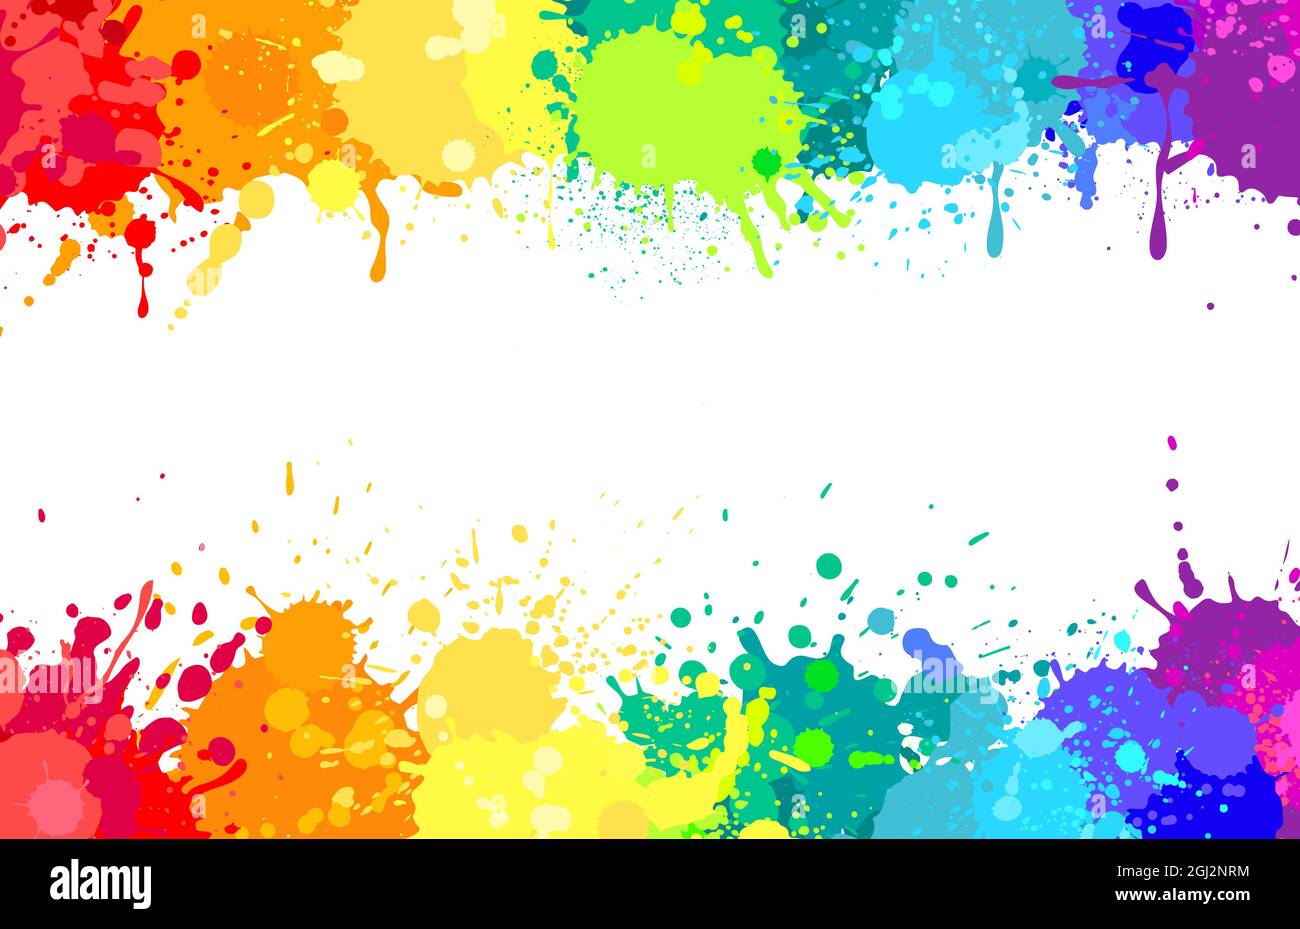 Colorful paint splatter background, painted rainbow splashes. Colored watercolor splash, abstract color spray paints explosion vector banner. Space for text with stains border or frame Stock Vector